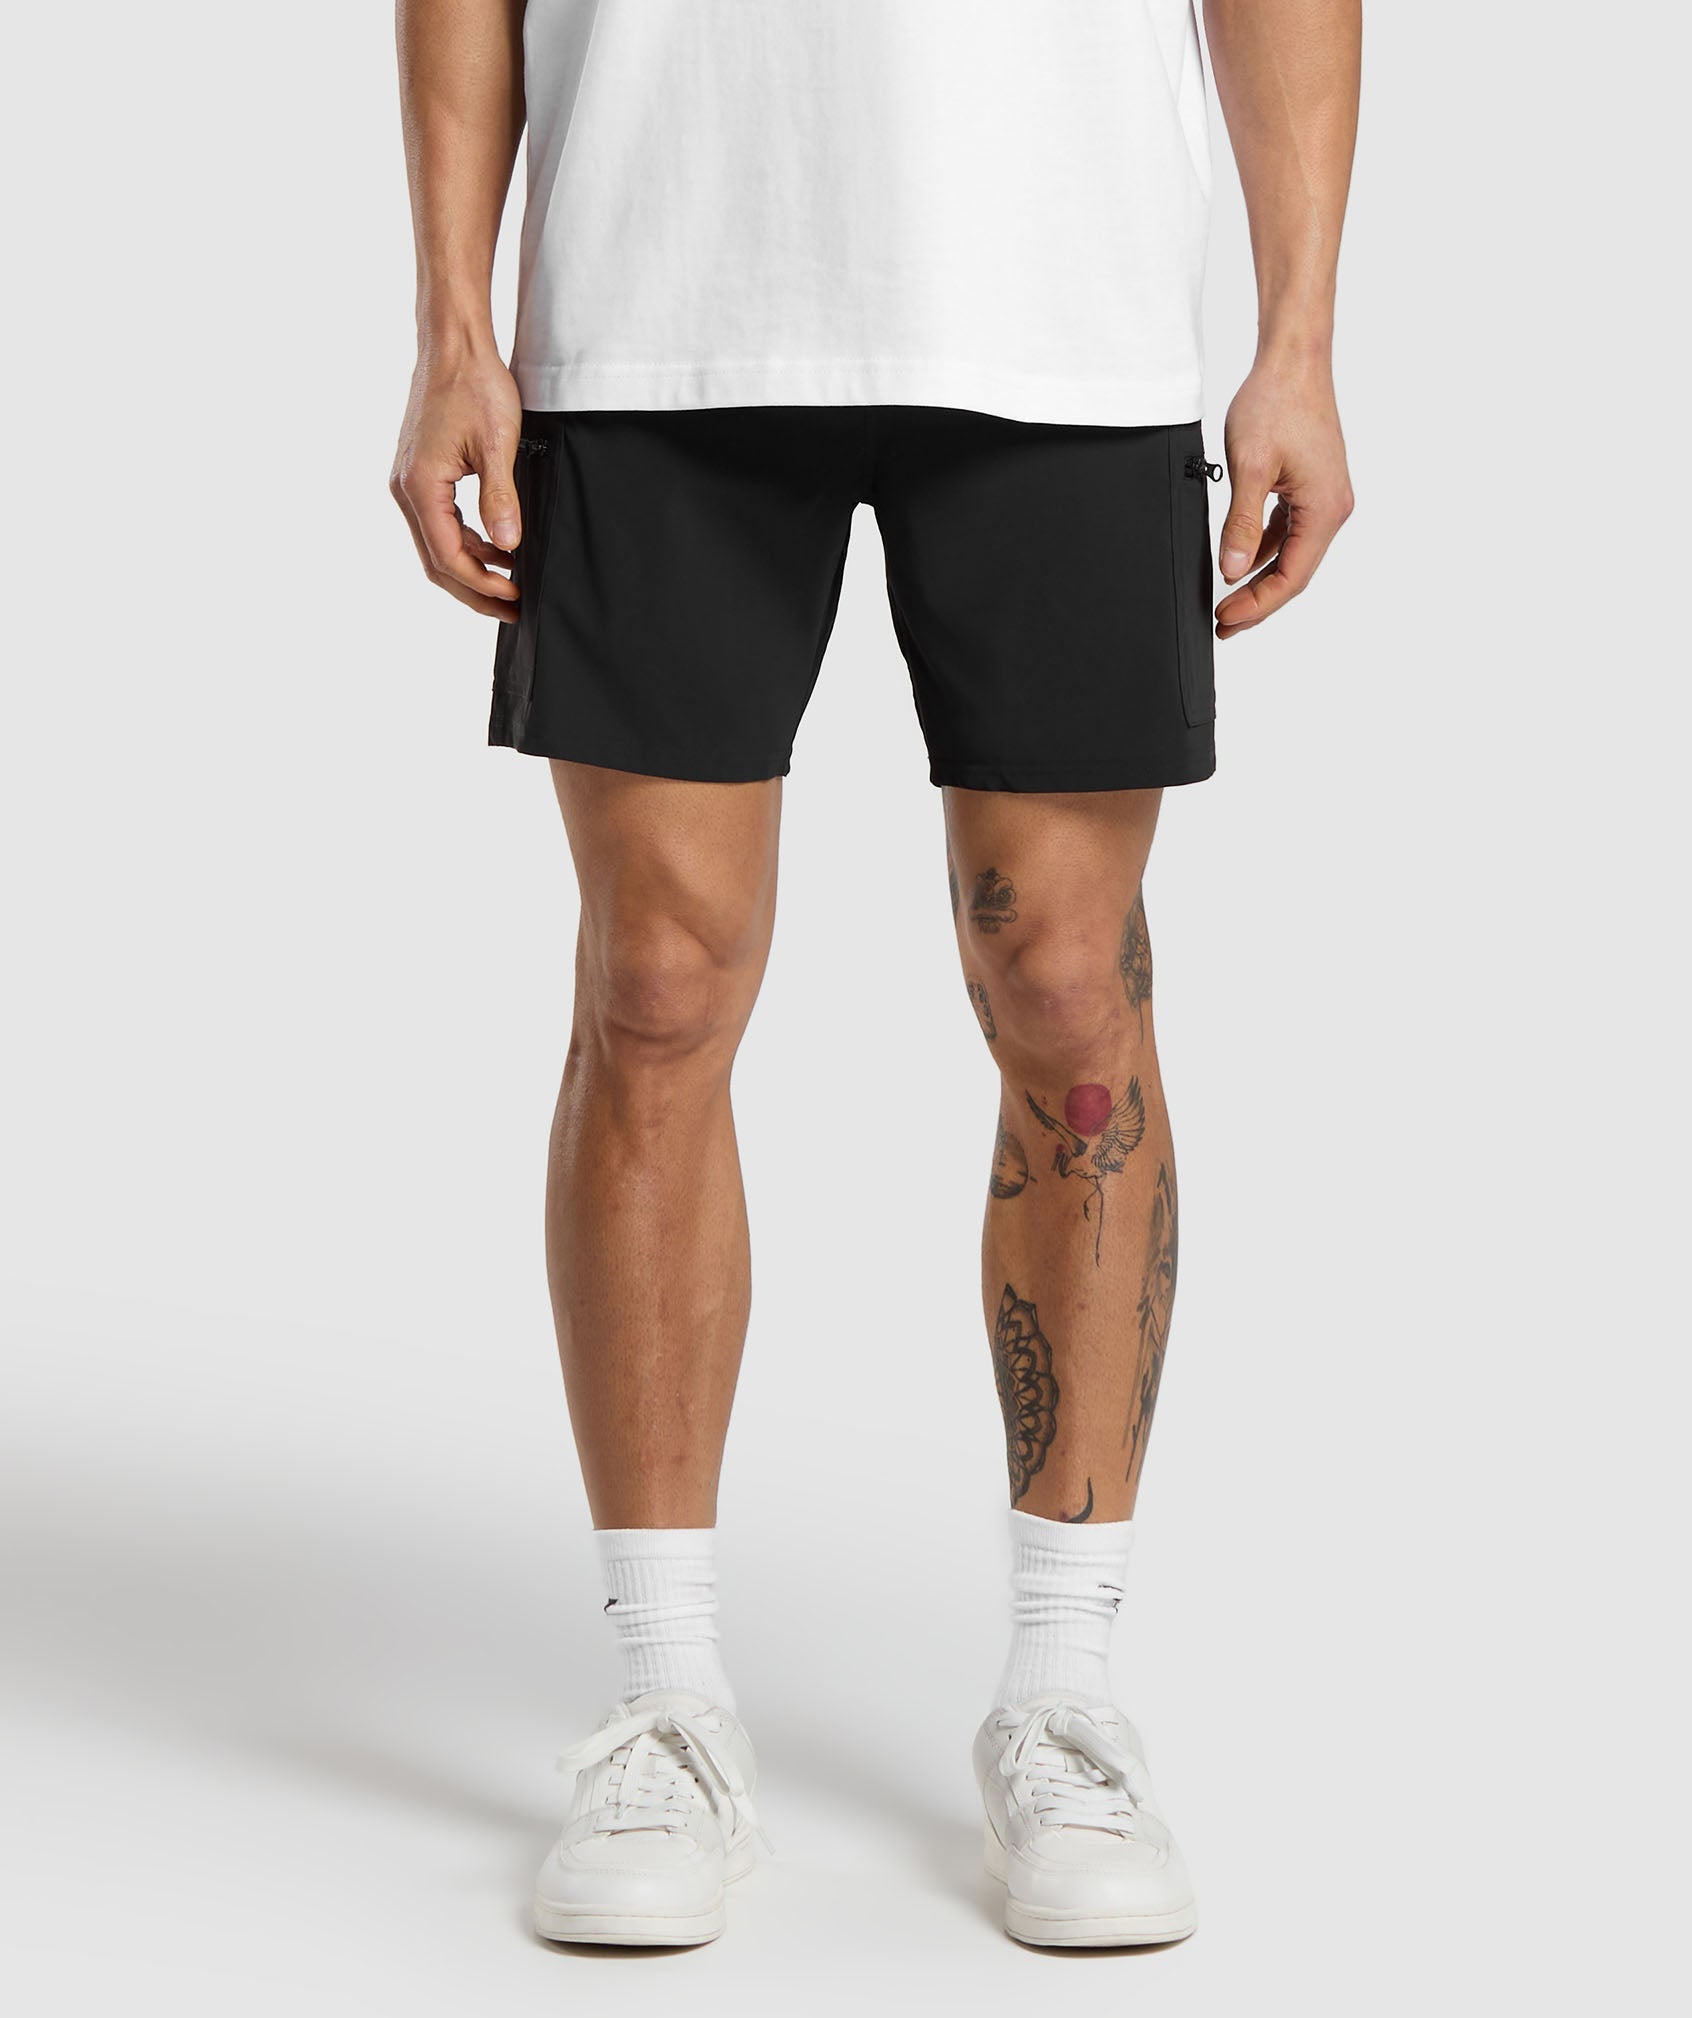 Rest Day 6" Cargo Shorts in Black - view 1